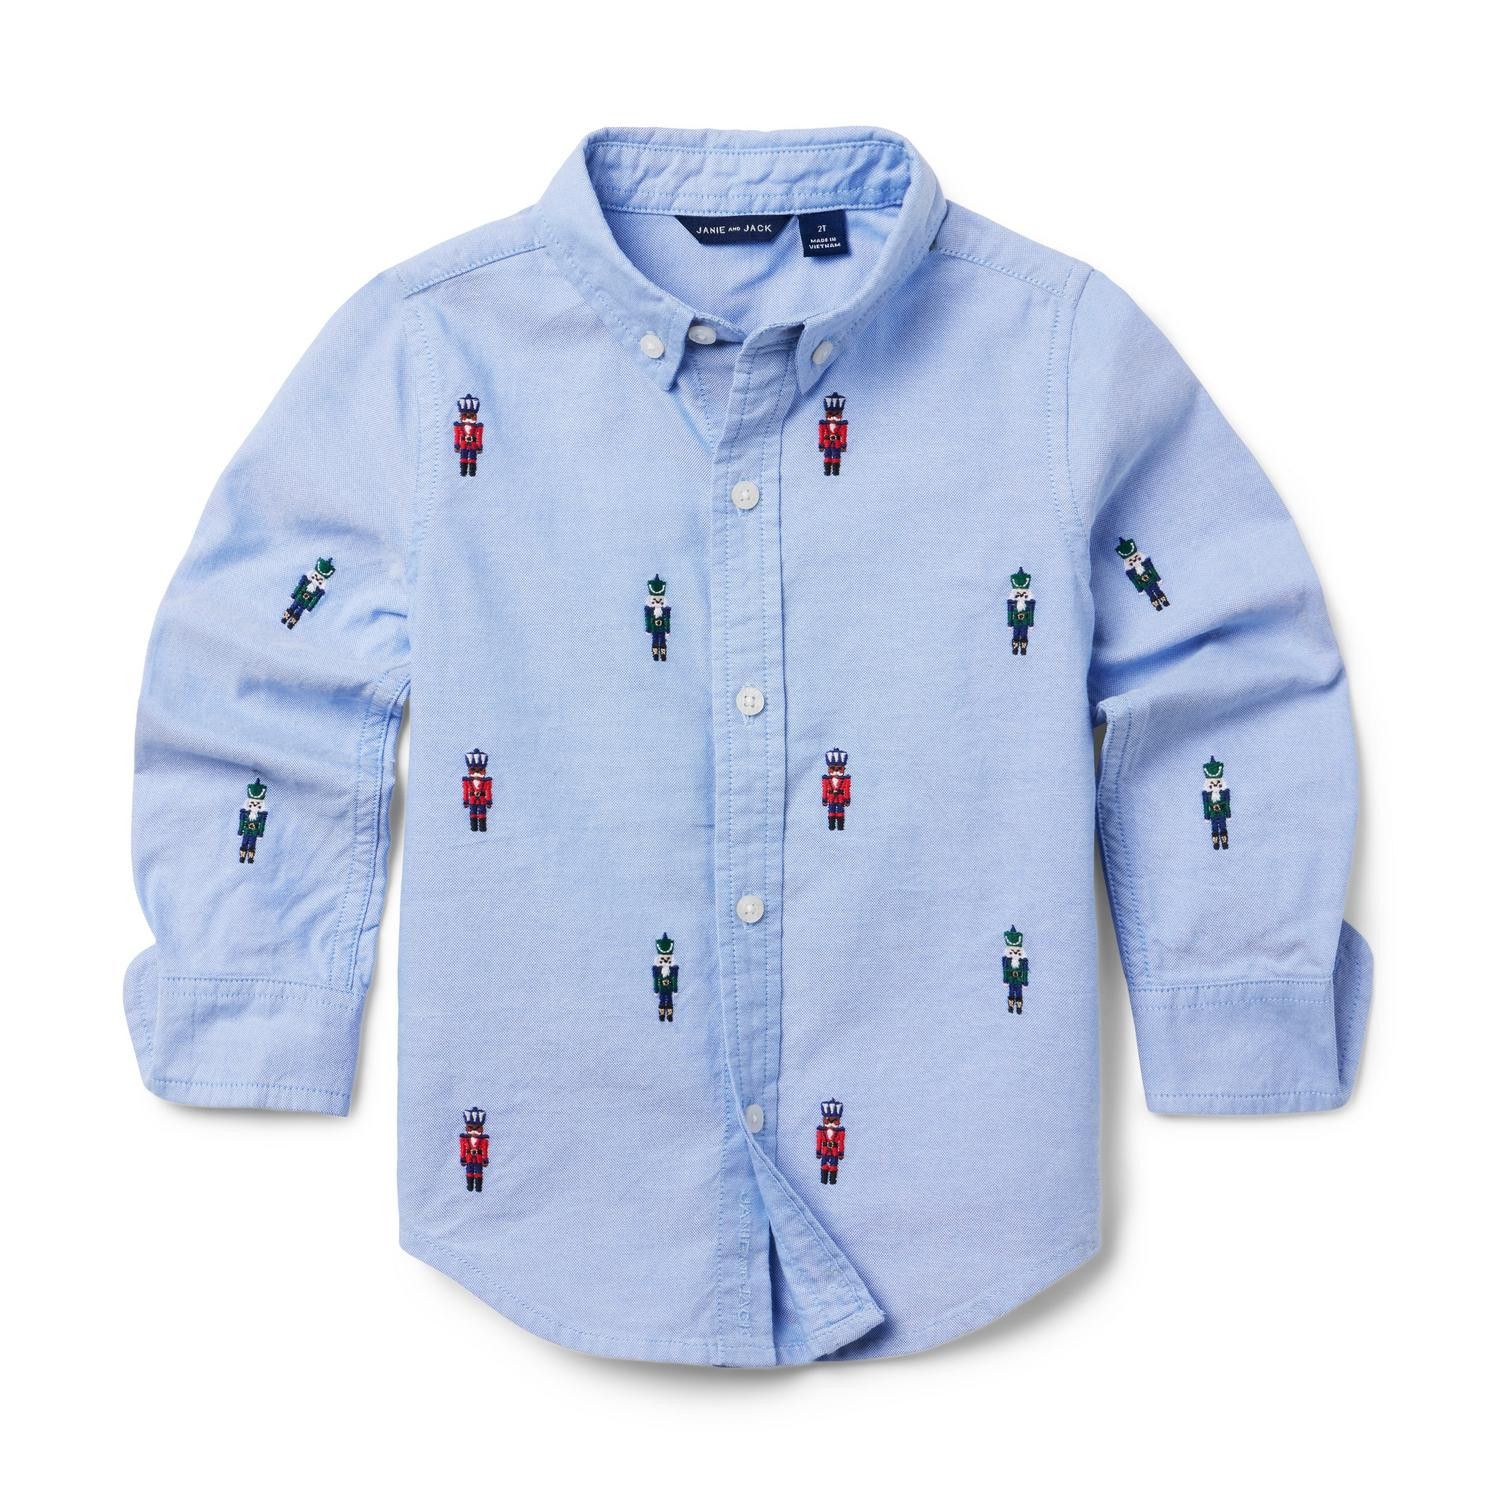 The Embroidered Oxford Shirt | Toddler Boy Clothes | Boy Gifts #LTKparties #LTKHoliday #LTKfamily  | Janie and Jack